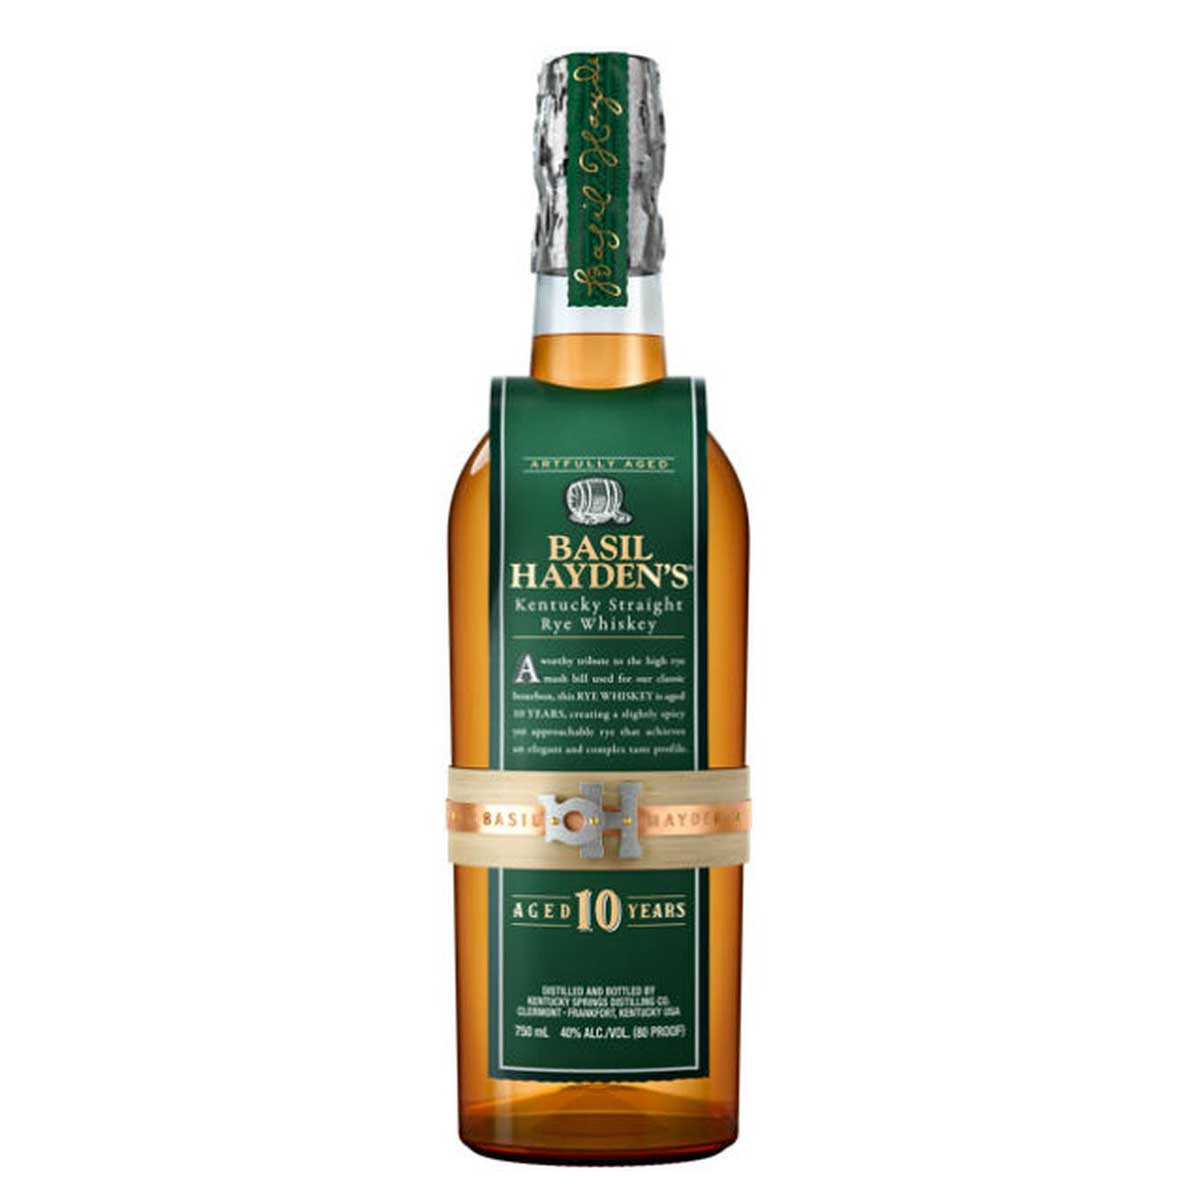 TAG Liquor Stores Delivery - Basil Hayden's 10 Year Old Kentucky Straight Rye Whiskey 750ml